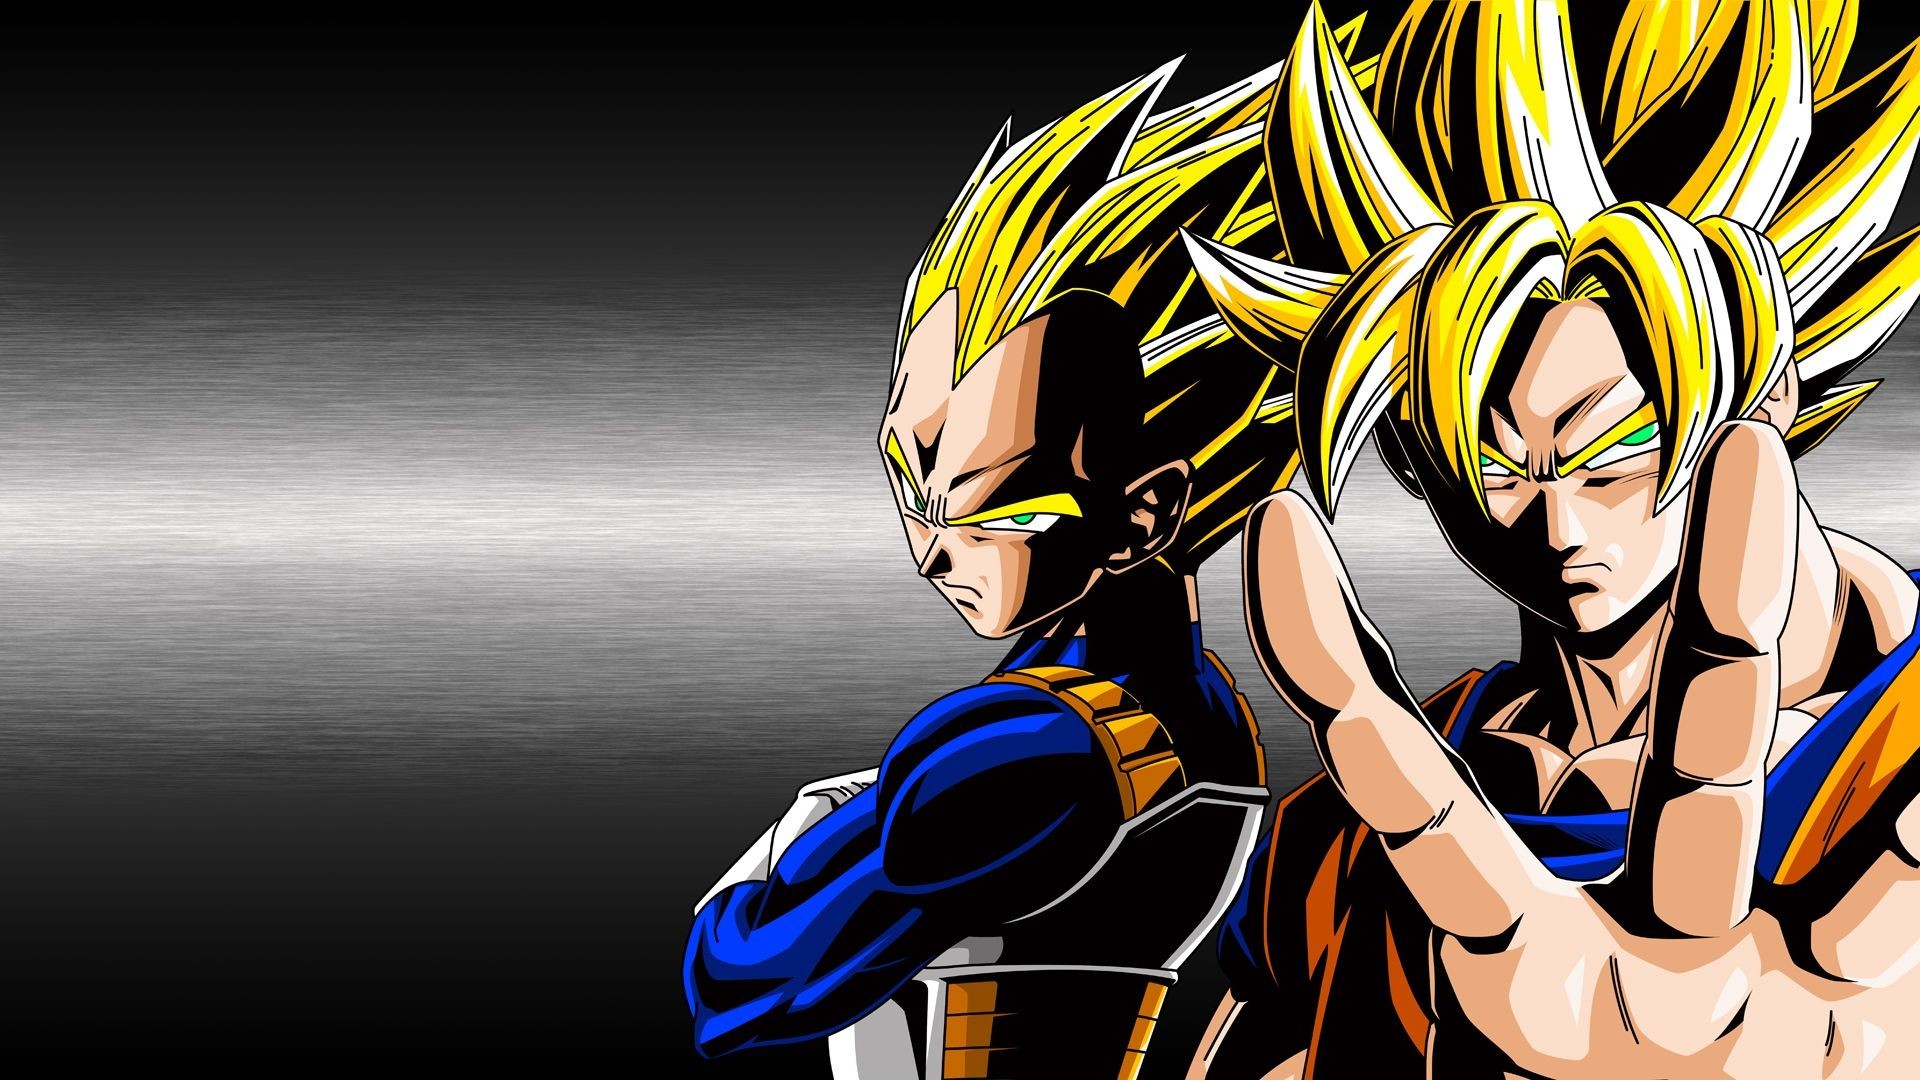 Wallpaper Goku Super Saiyan Desktop with image resolution 1920x1080 pixel. You can use this wallpaper as background for your desktop Computer Screensavers, Android or iPhone smartphones